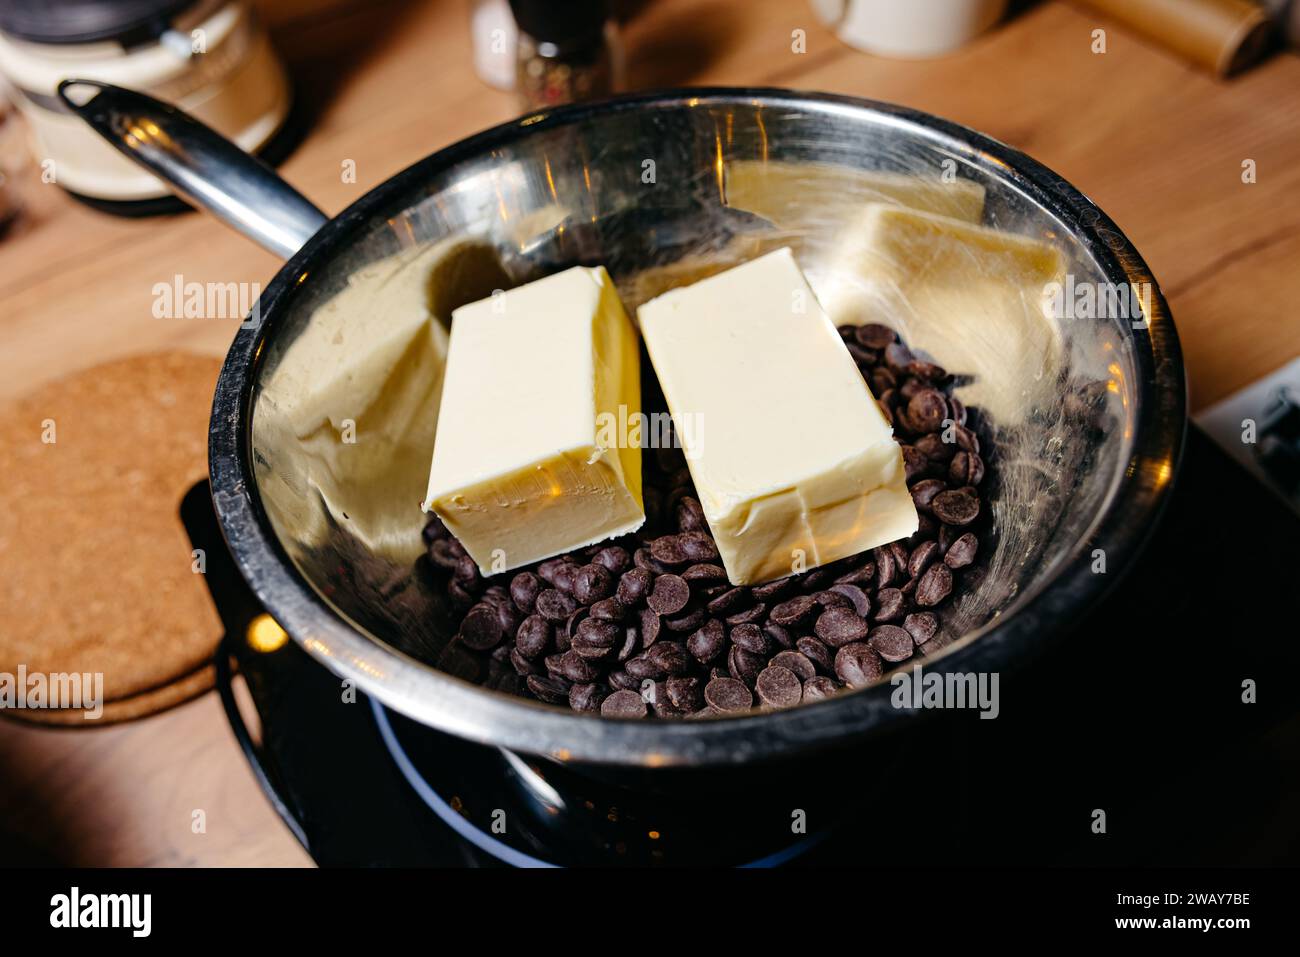 A double boiler pan with dark chocolate chips and blocks of butter, a classic technique for melting ingredients smoothly for baking. Stock Photo